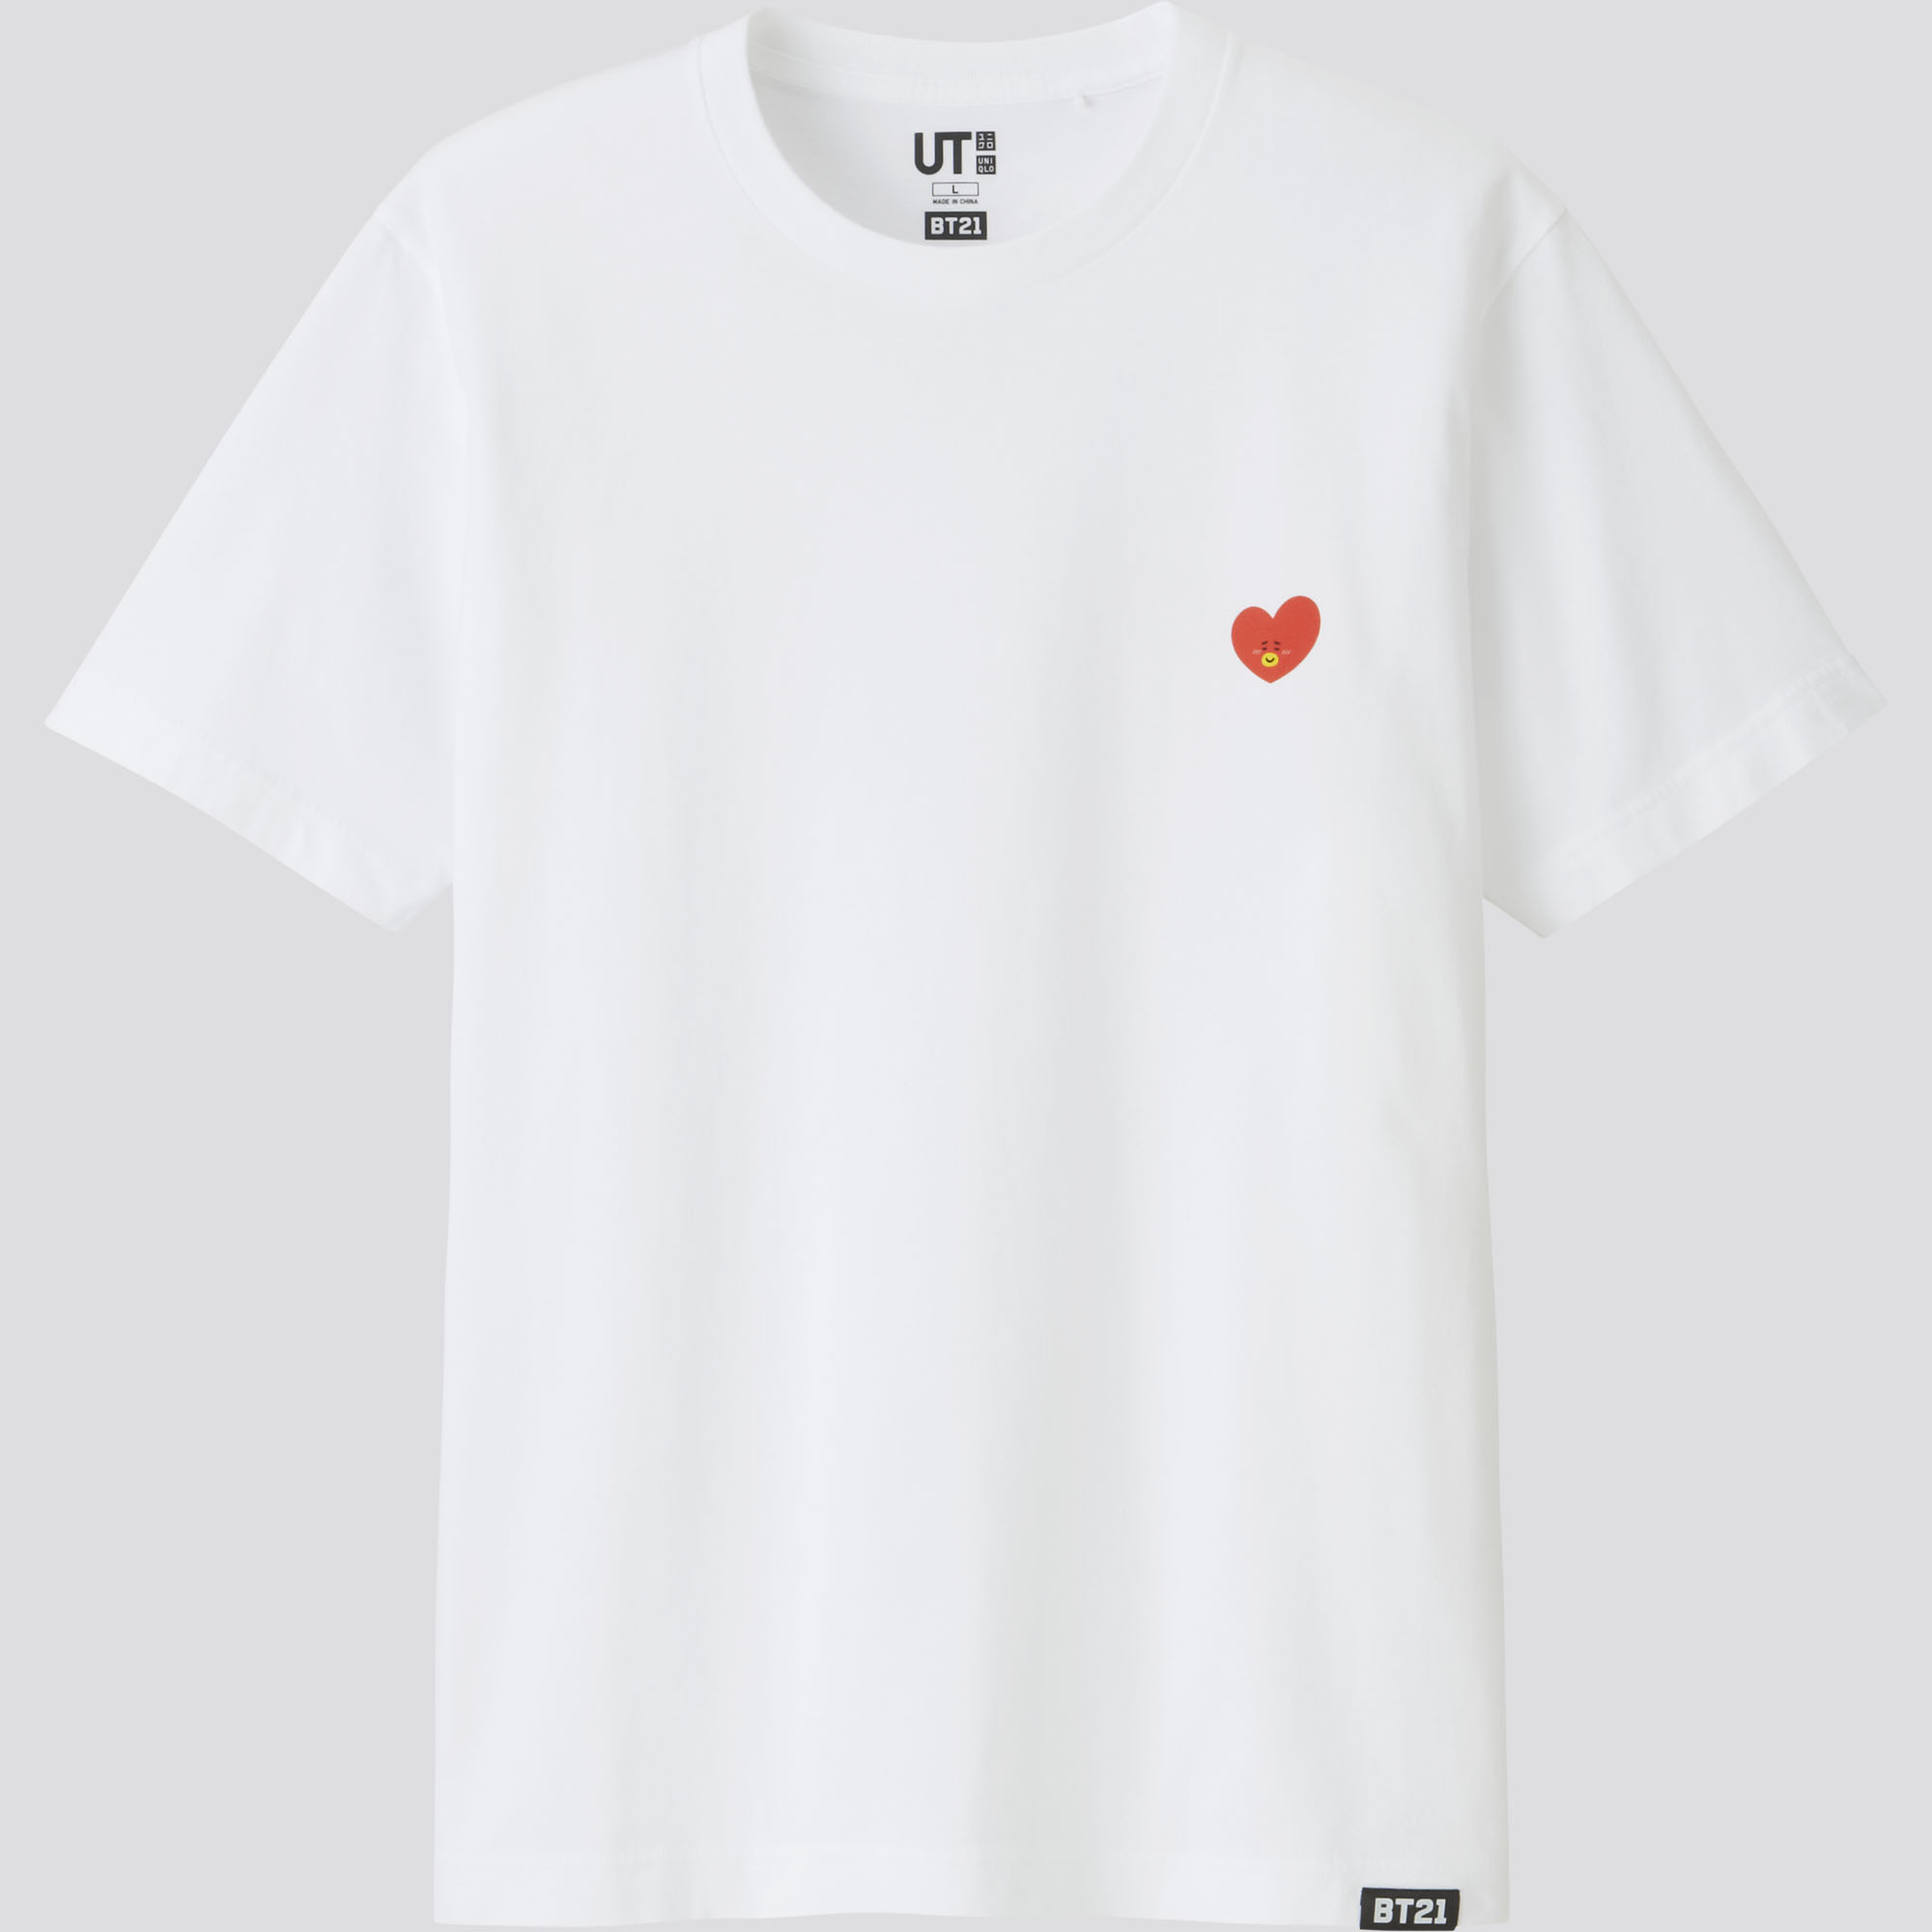 Uniqlo T-Shirts With 11 Bt21 Designs Selling At S$14.90 In S'Pore From June  21, 2019 - Mothership.Sg - News From Singapore, Asia And Around The World